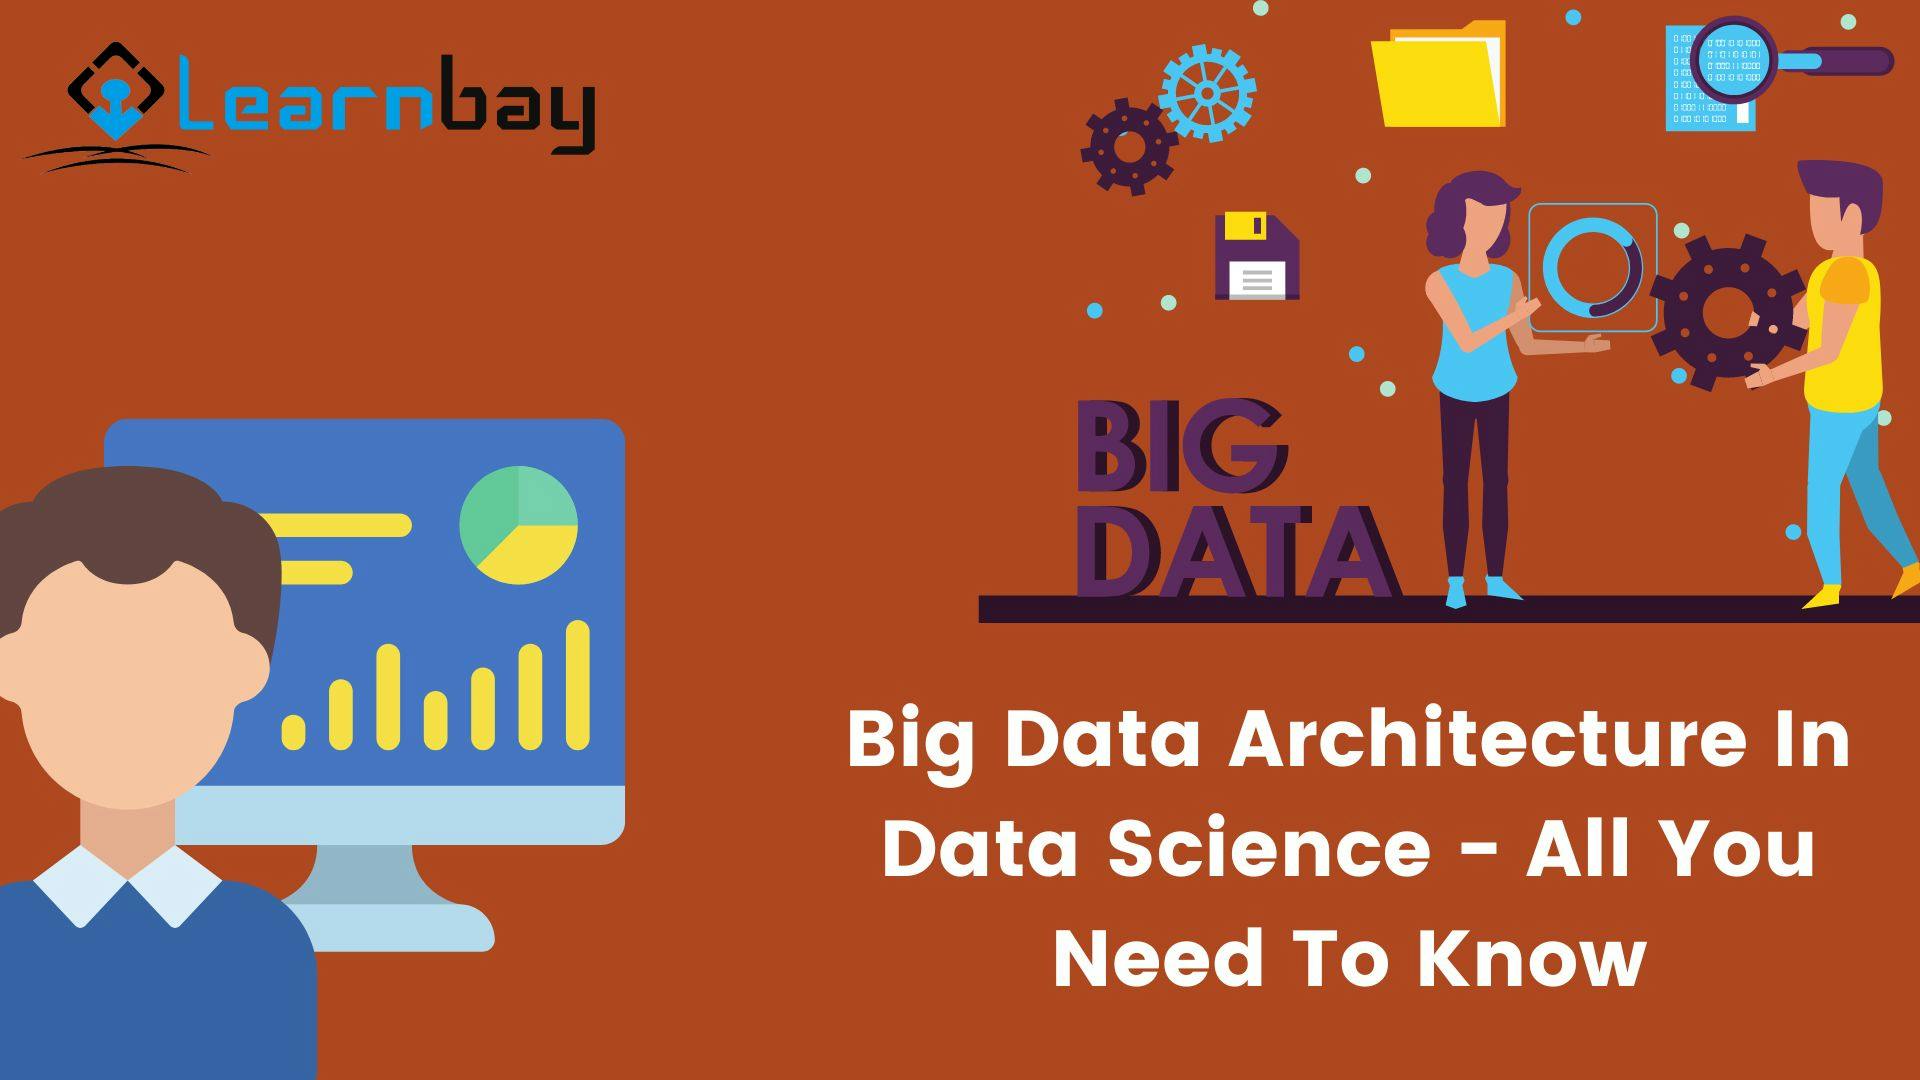 Big Data Architecture In Data Science - All You Need To Know.jpg